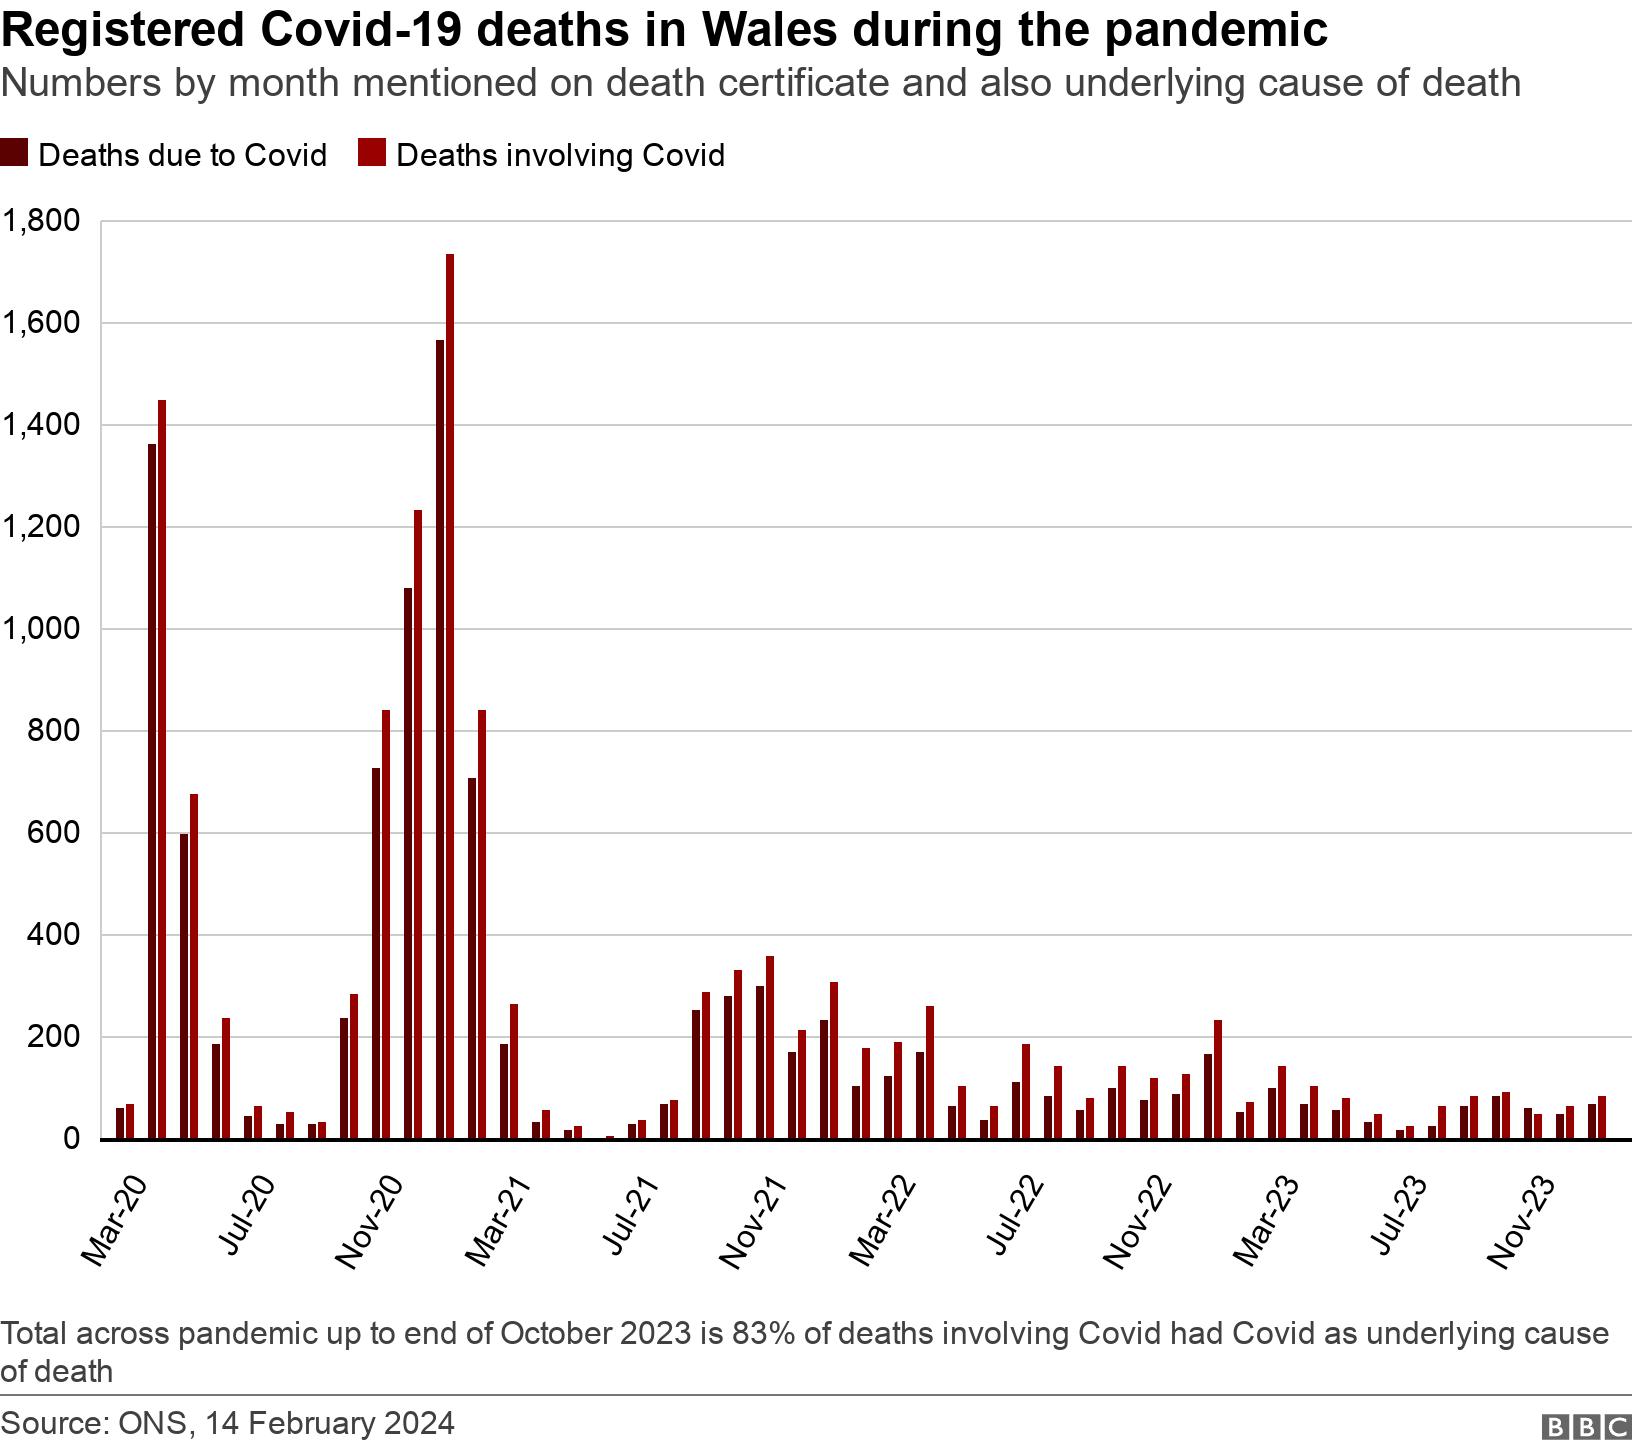 Registered Covid-19 deaths in Wales during the pandemic. Numbers by month mentioned on death certificate and also underlying cause of death.  Total across pandemic up to end of October 2023 is 83% of deaths involving Covid had Covid as underlying cause of death.